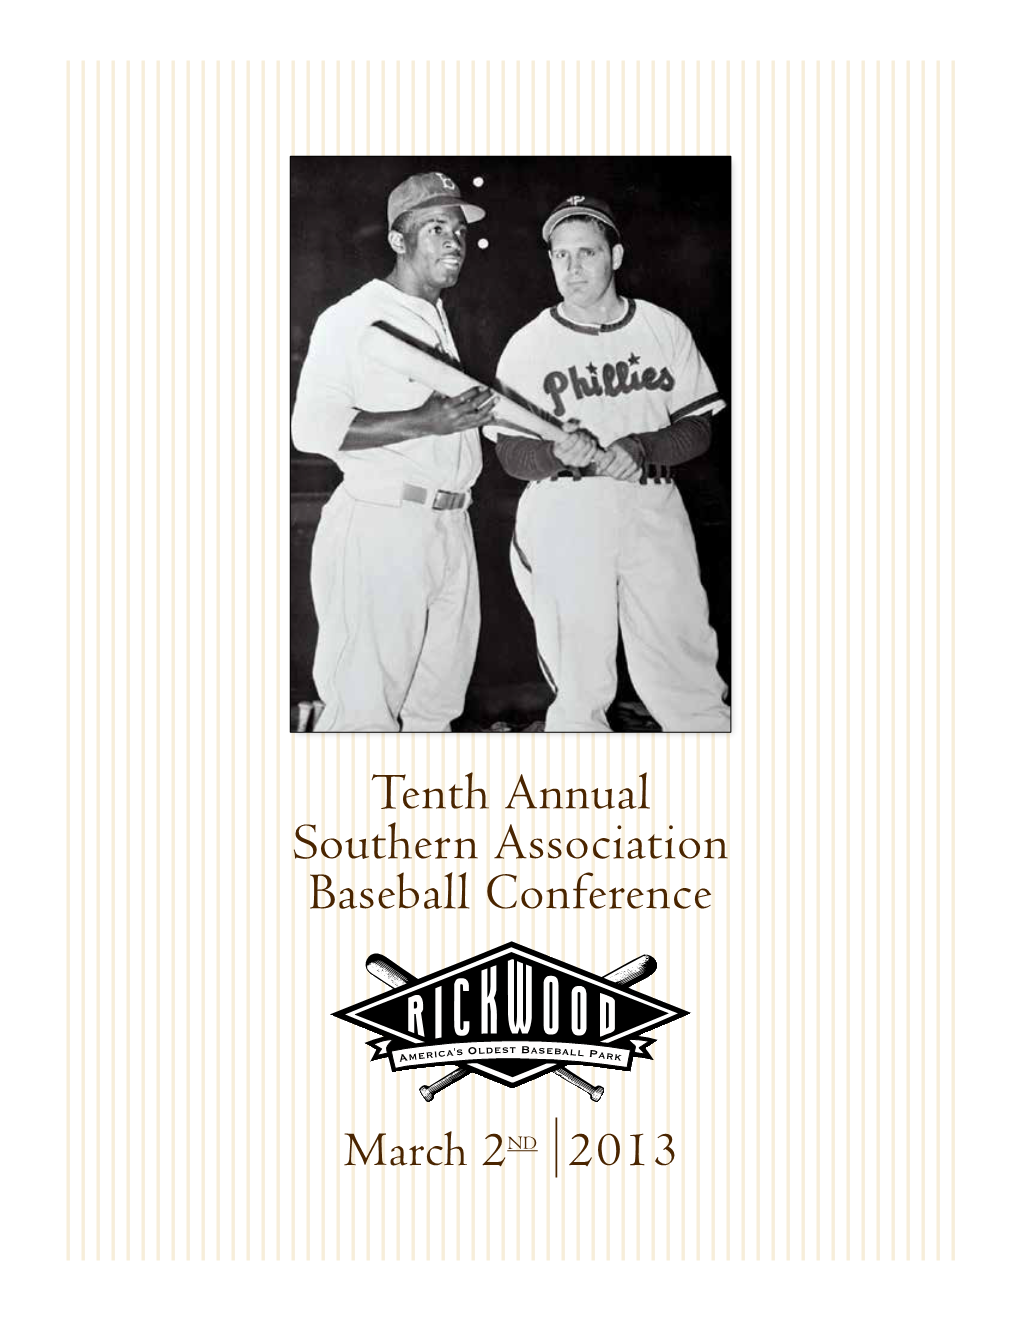 Tenth Annual Southern Association Baseball Conference